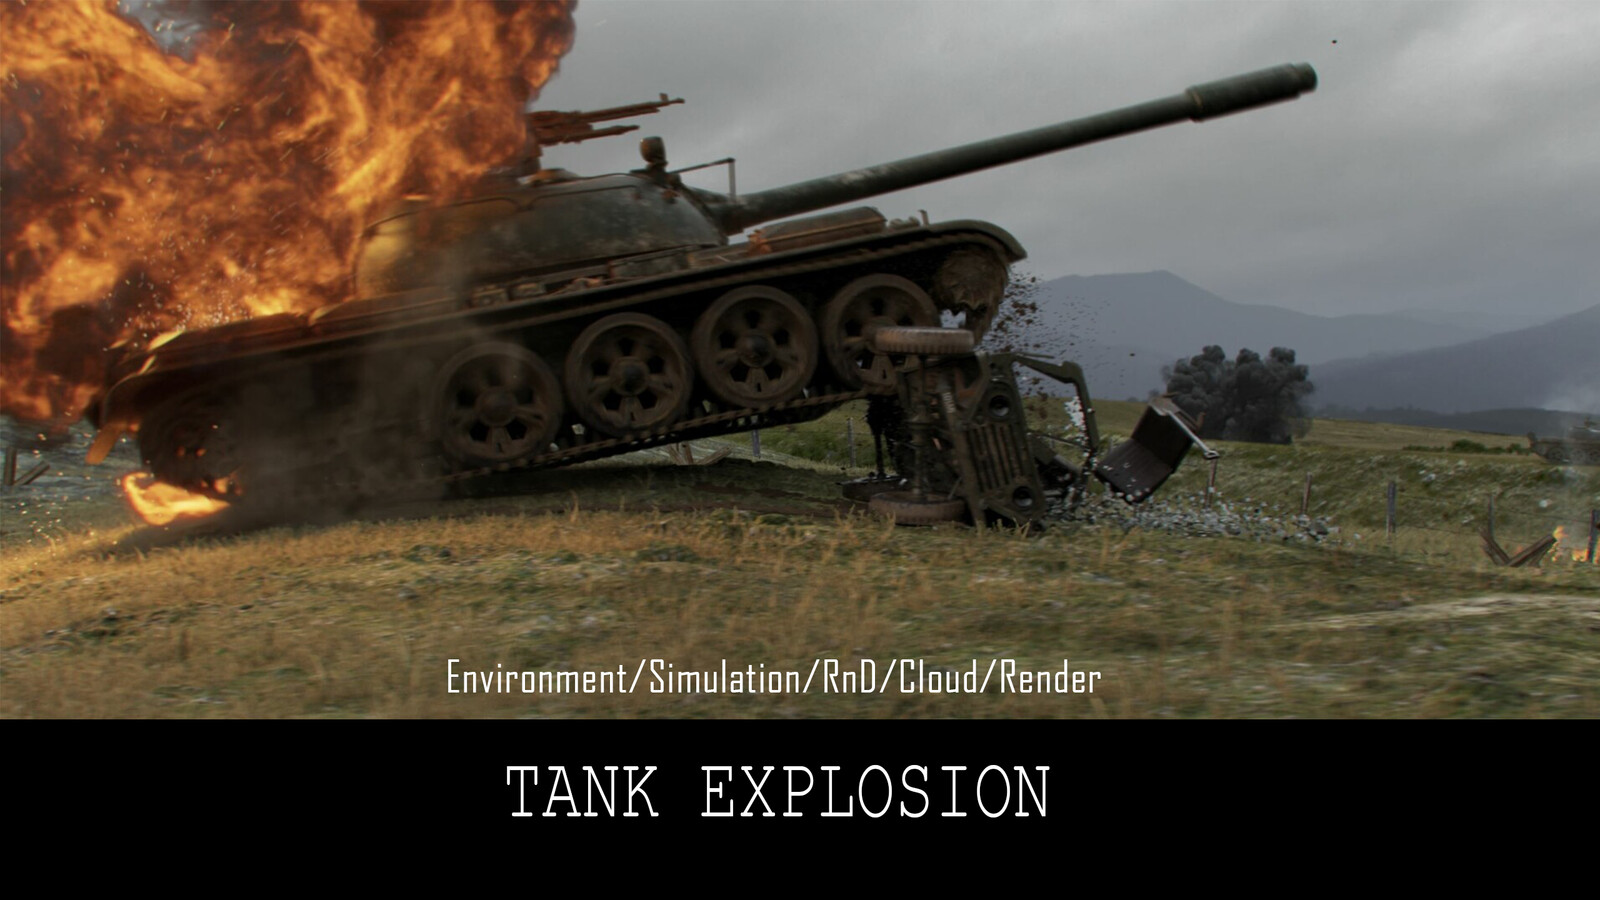 Tank Exposion then Vehicle Deformed!